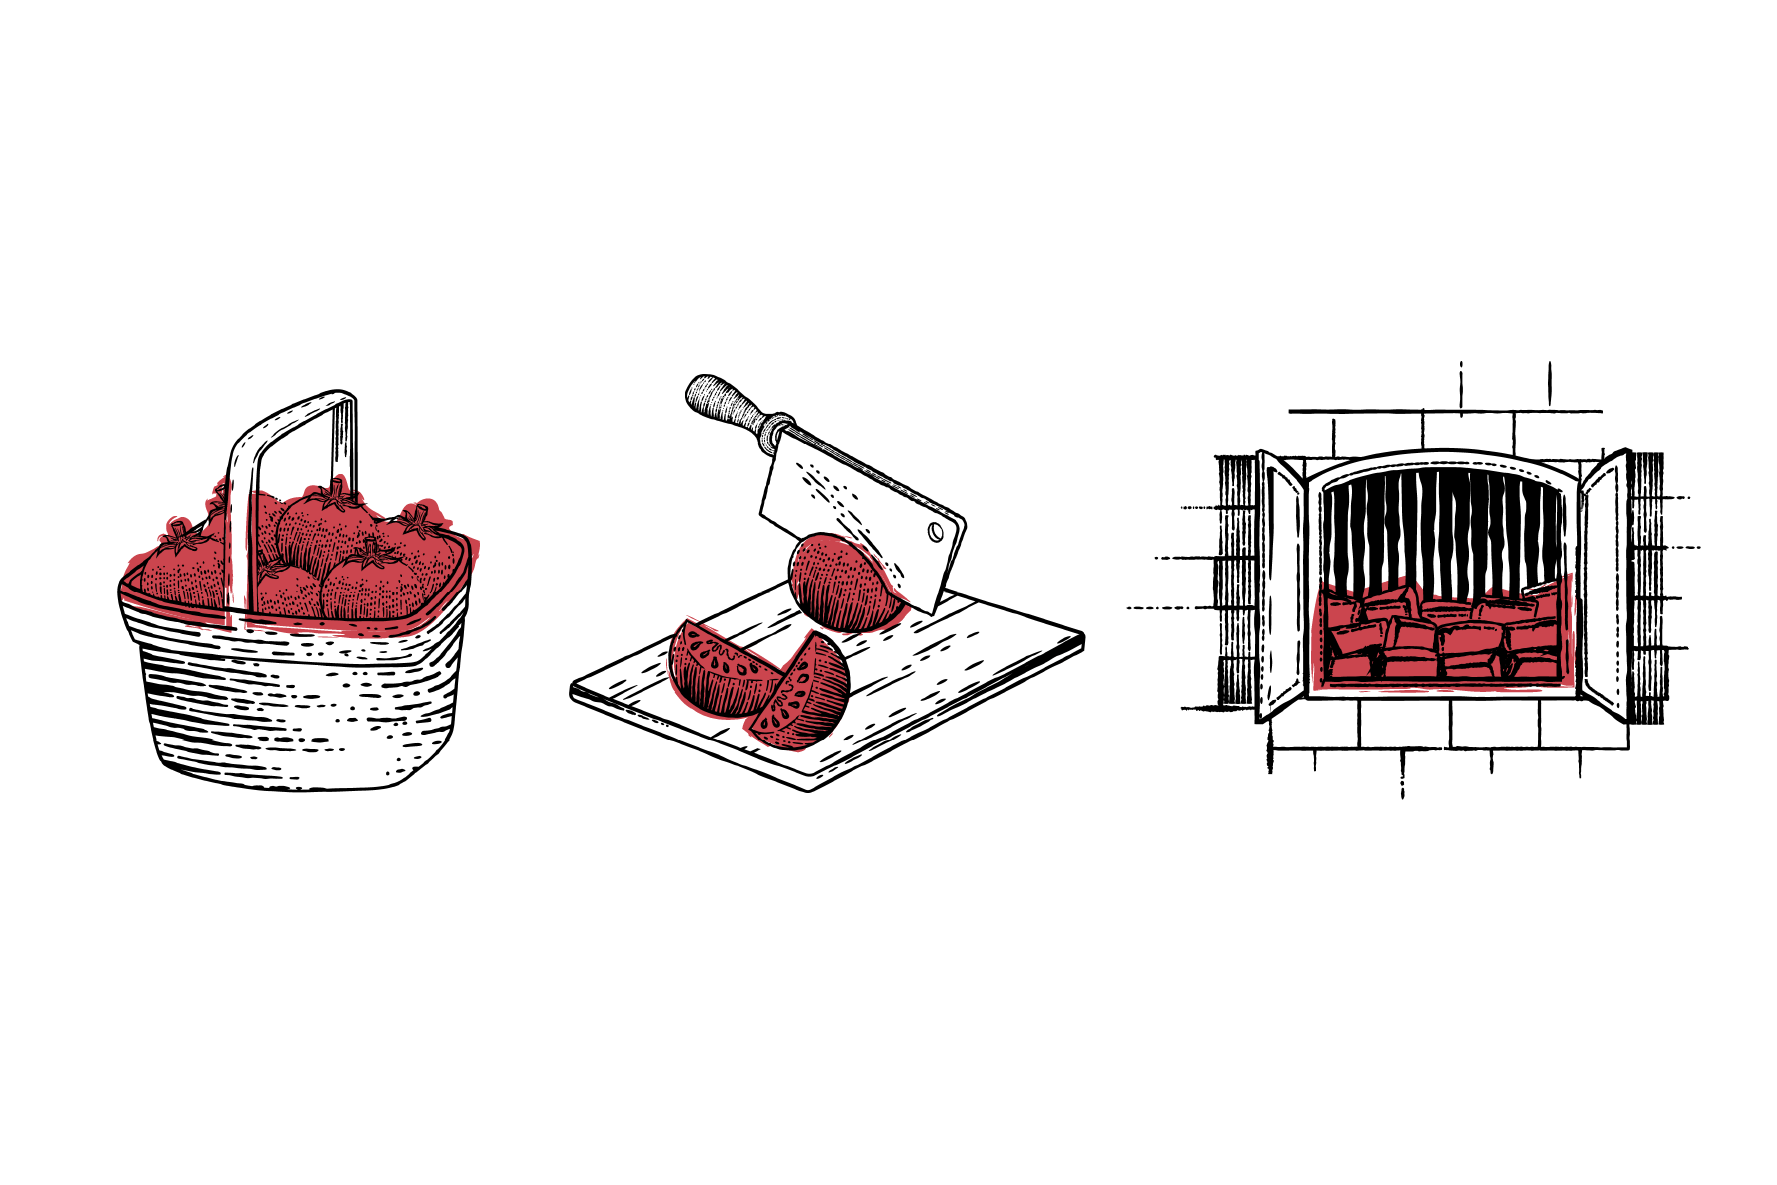 drawings of: 1. basket of tomatoes; 2. Knife slicing tomatoes on cutting board; 3. Chimney smoker full of wood